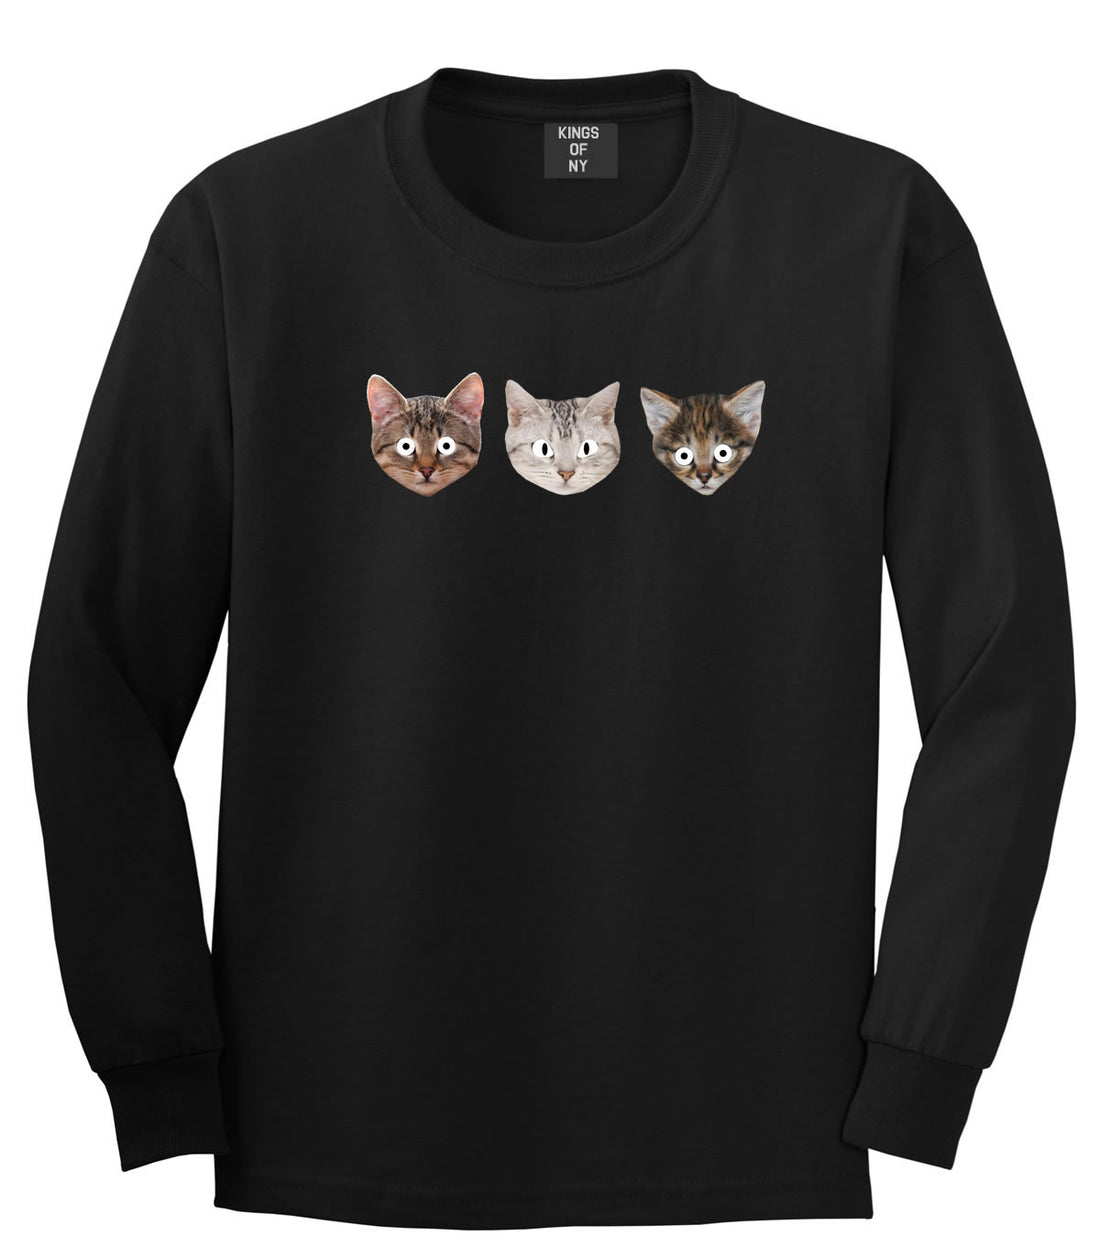 Cats Crazy Kittens Long Sleeve T-Shirt in Black By Kings Of NY